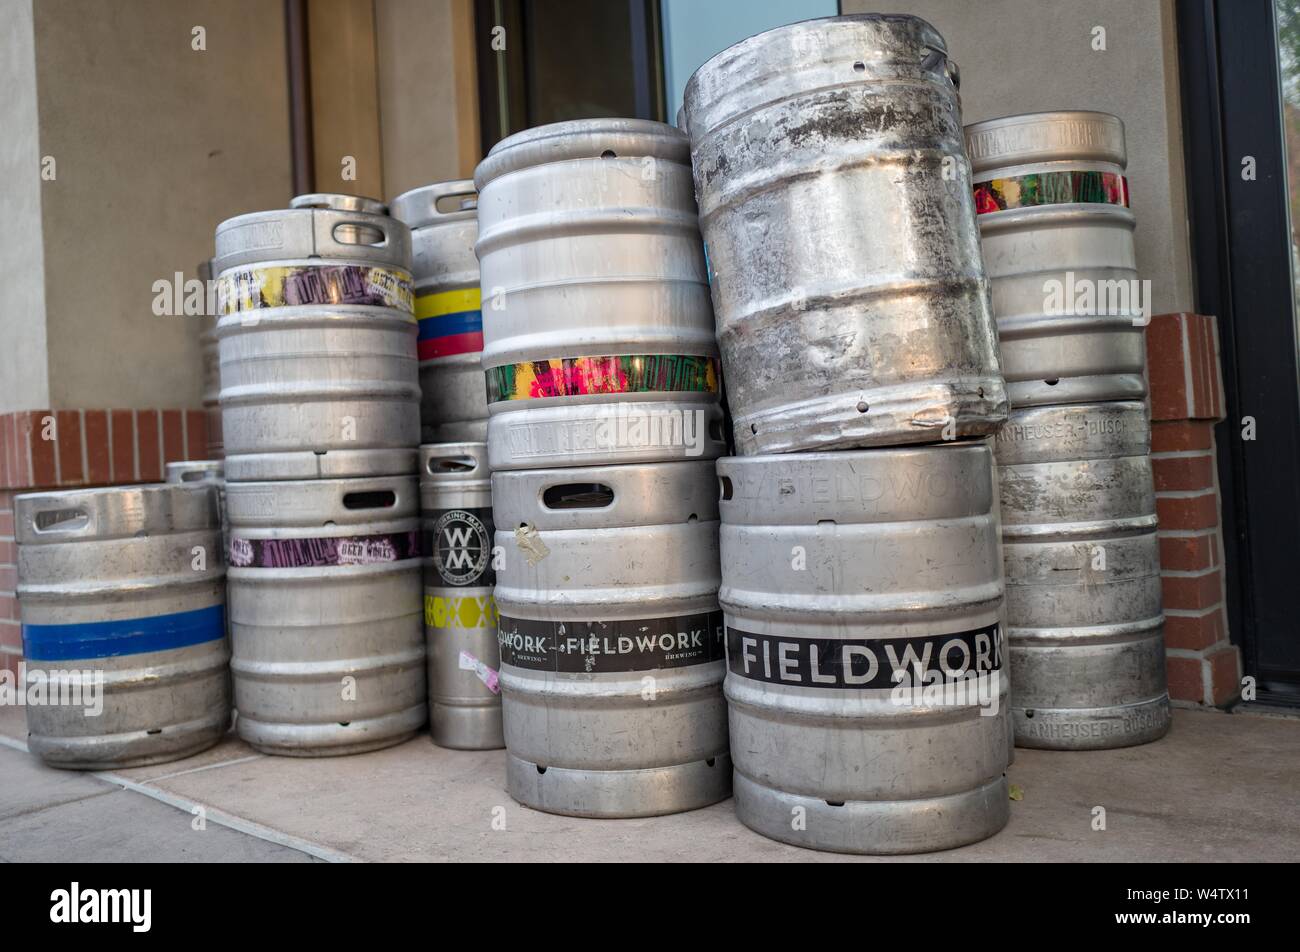 Low-angle view of stack of kegs containing craft brew beer from microbreweries including Fieldwork, in downtown Livermore, California, November 19, 2018. () Stock Photo